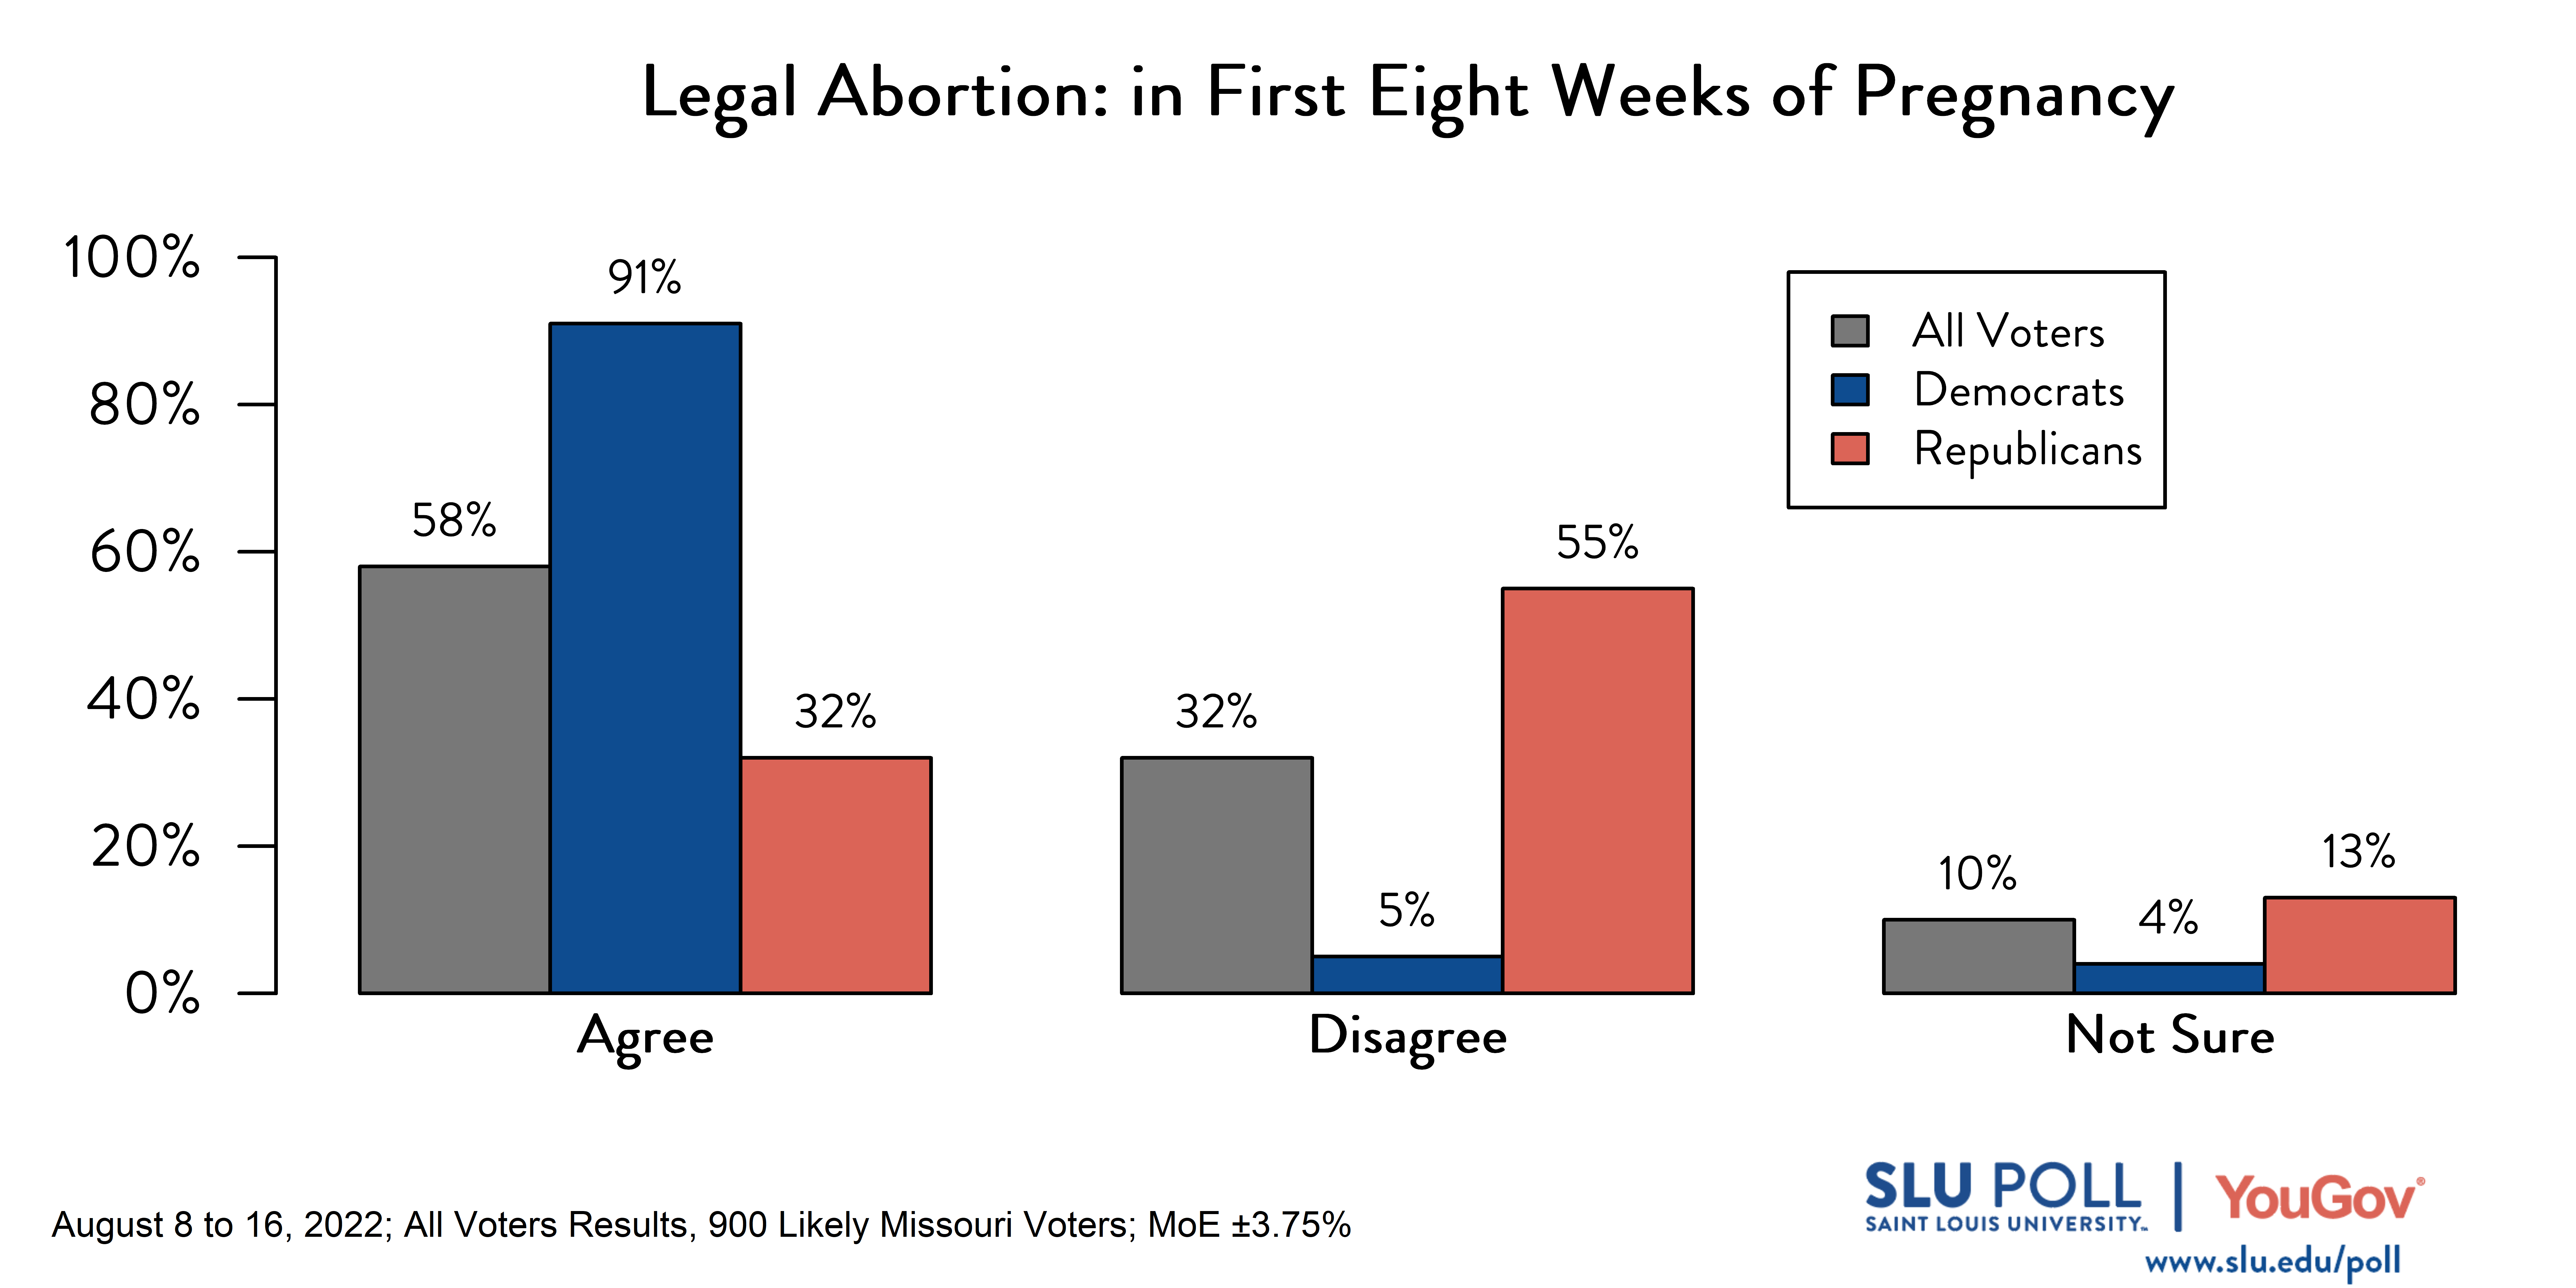 Likely voters' responses to 'Do you think it should be possible for a woman to legally obtain an abortion in the state of Missouri: in the first 8 weeks of the pregnancy?': 58% Agree, 32% Disagree, and 10% Not Sure. Democratic voters' responses: ' 91% Agree, 5% Disagree, and 4% Not Sure. Republican voters' responses: 32% Agree, 55% Disagree, and 13% Not Sure. 